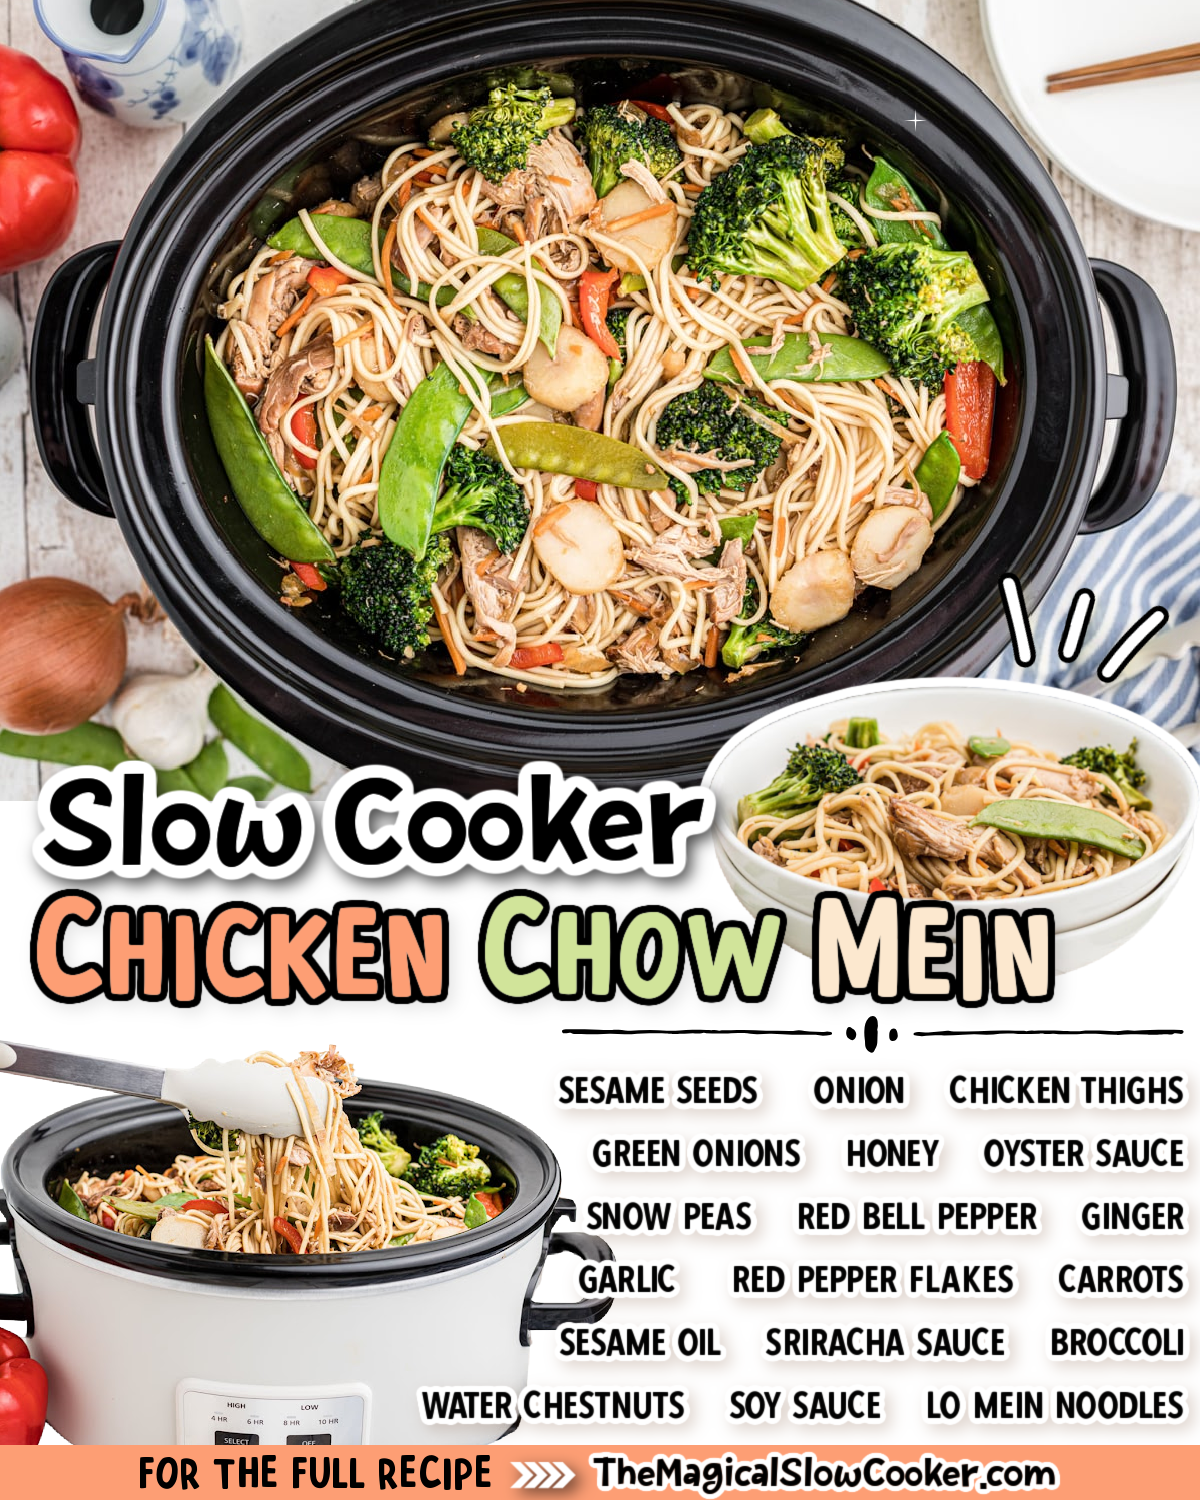 Chicken chow mein images text of the ingredients for facebook and pinterest.